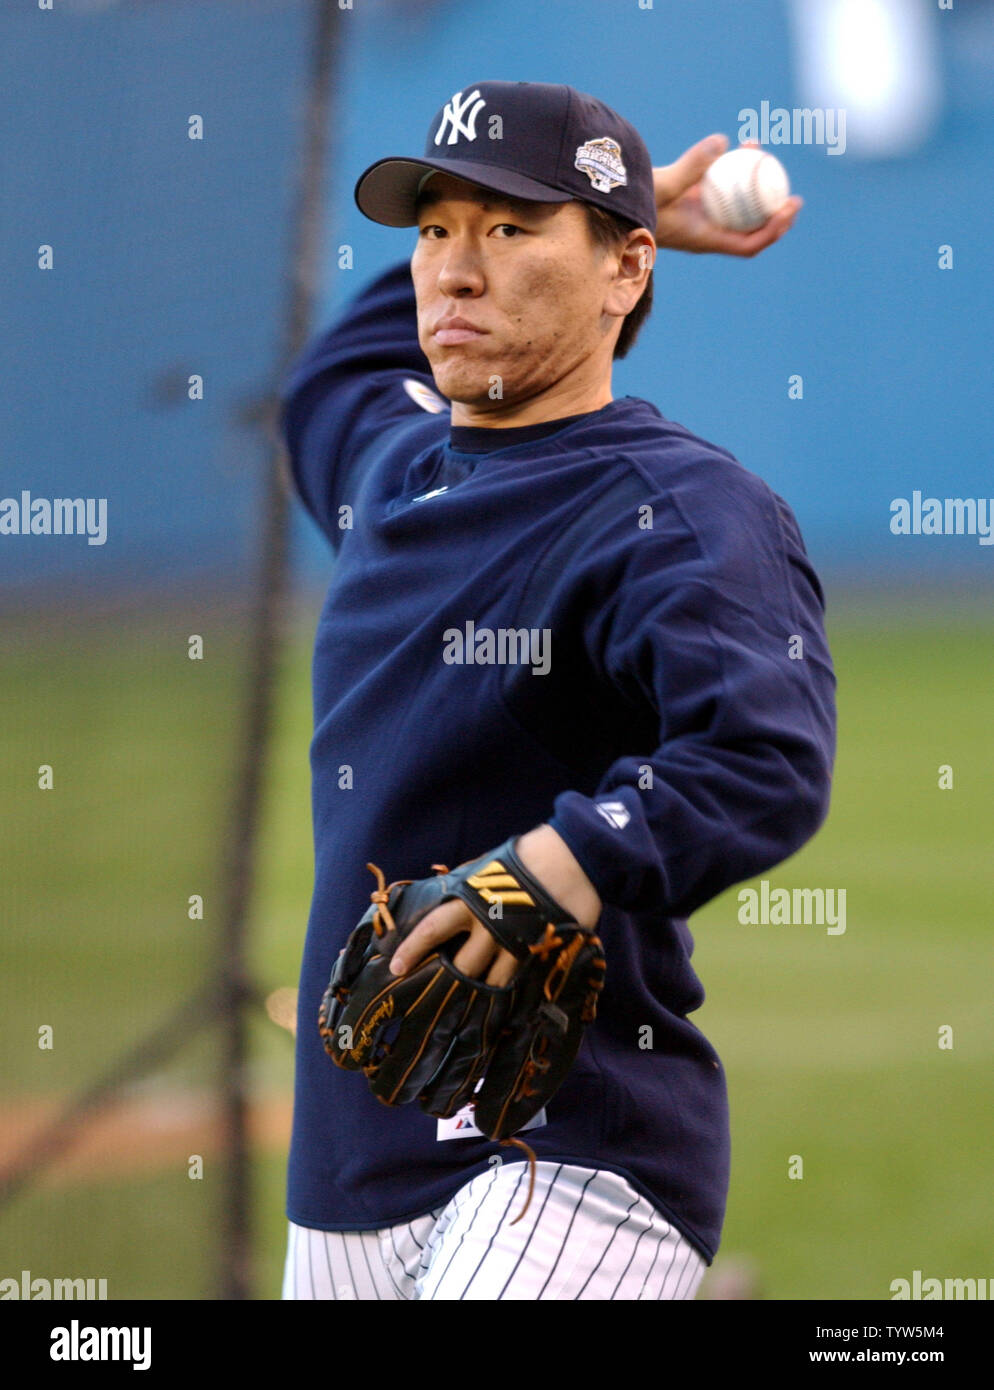 The New York Yankees' Hideki Matsui warms up before Game 1 of the World Series vs. the Florida Marlins at Yankee Stadium on October 18, 2003.   (UPI/Roger L. Wollenberg) Stock Photo